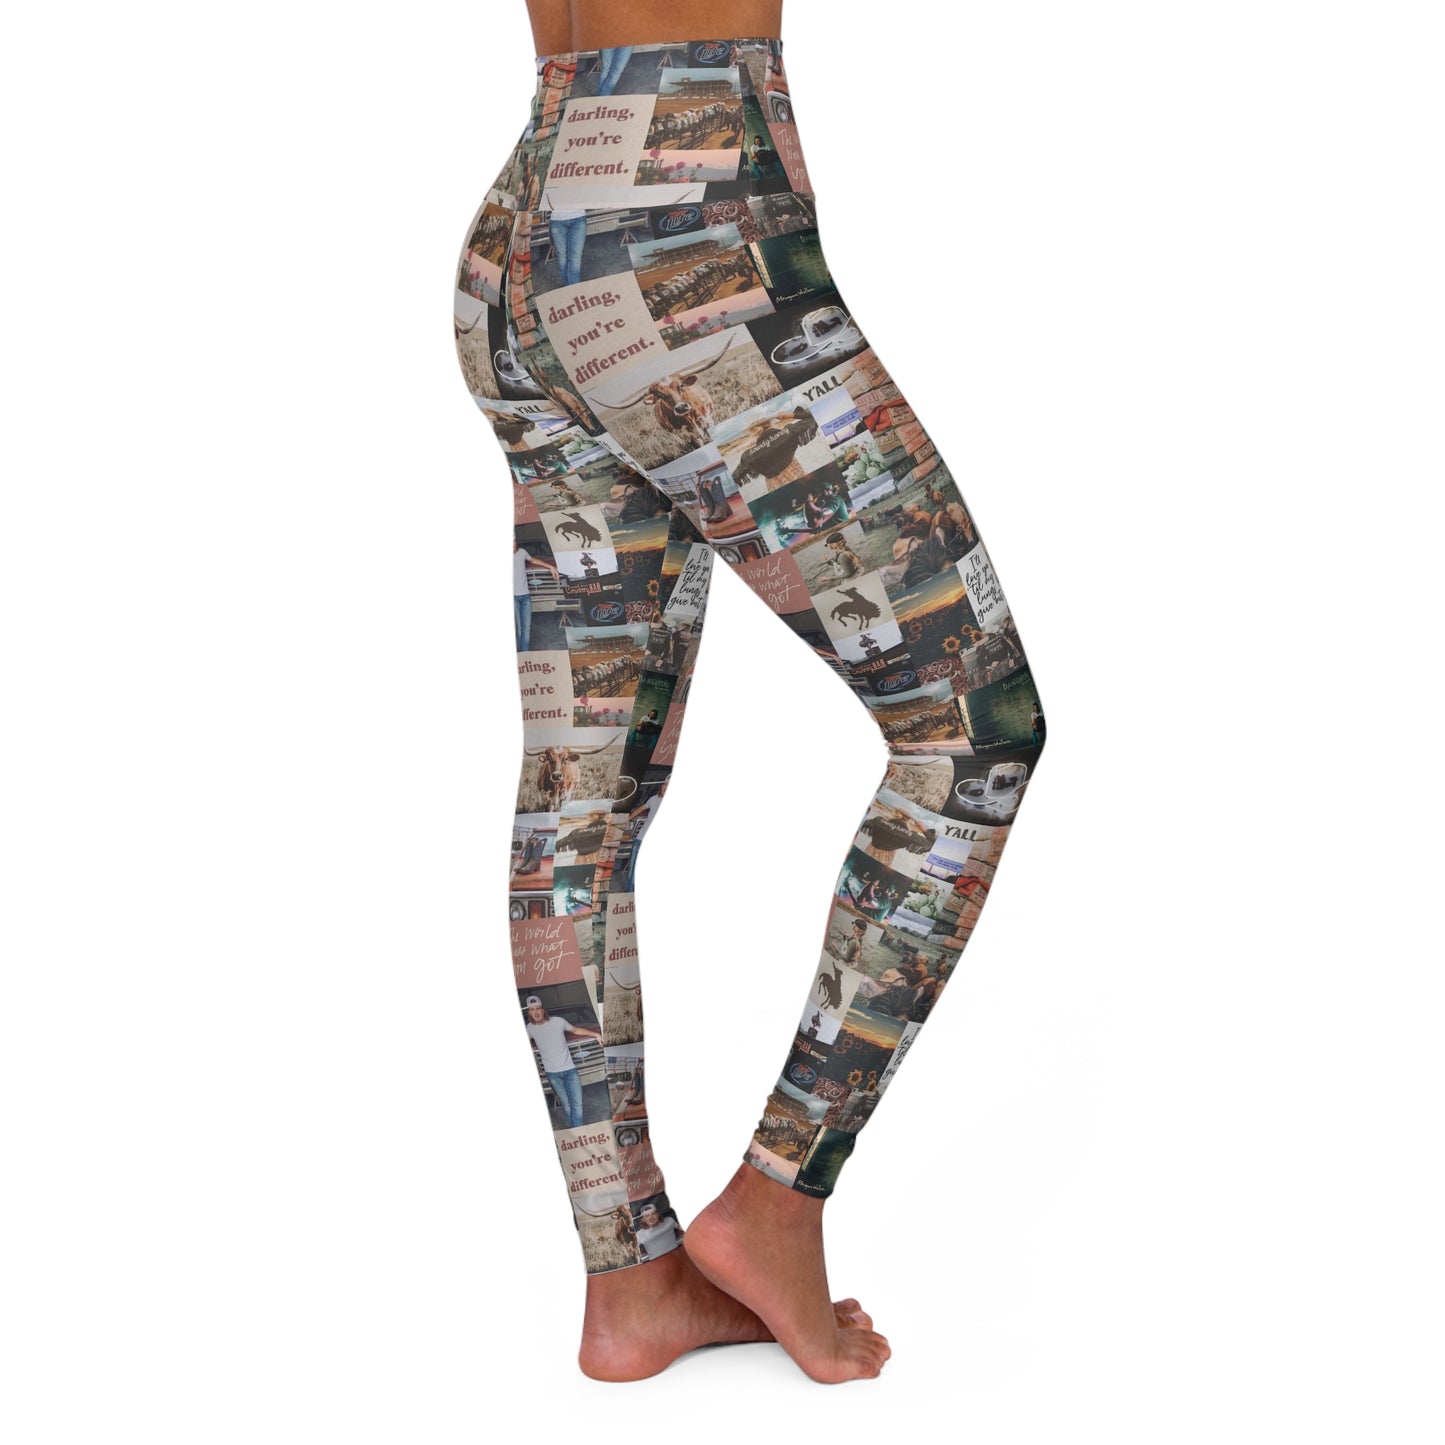 Morgan Wallen Darling You're Different Collage High Waisted Yoga Leggings